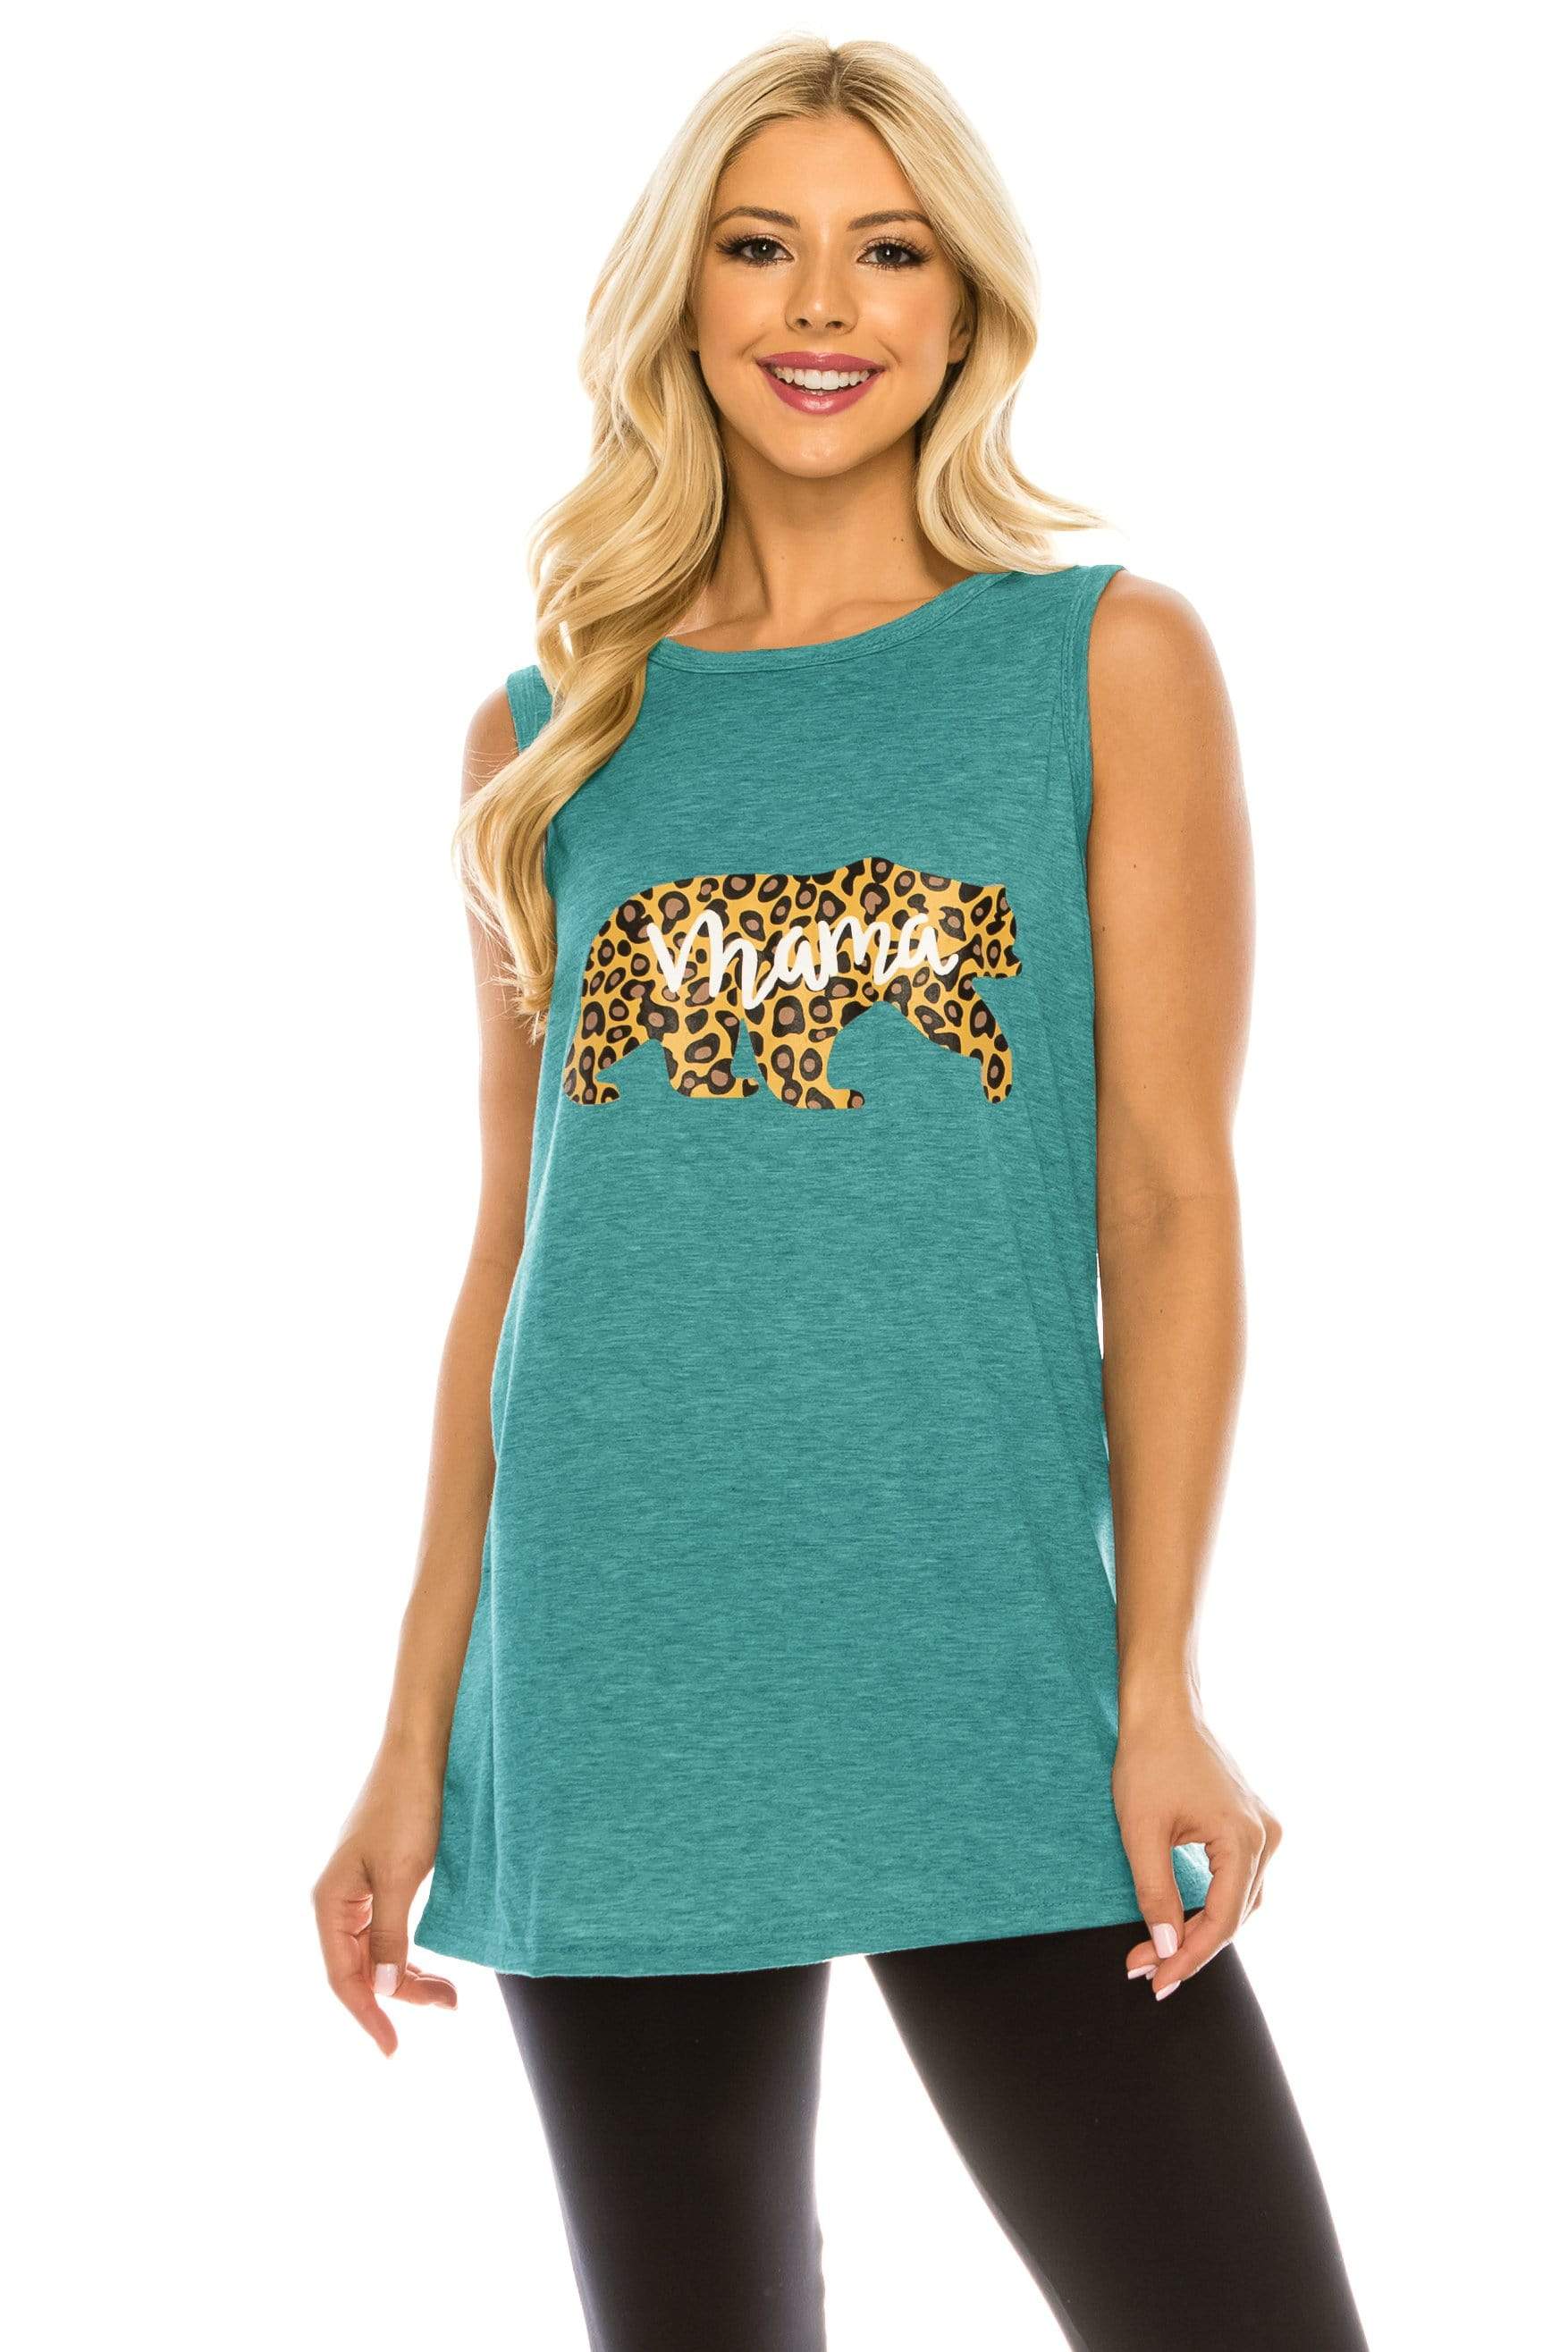 Haute Edition Women's Mama Bear Loose Fit Tank top. Plus size available Daily Haute